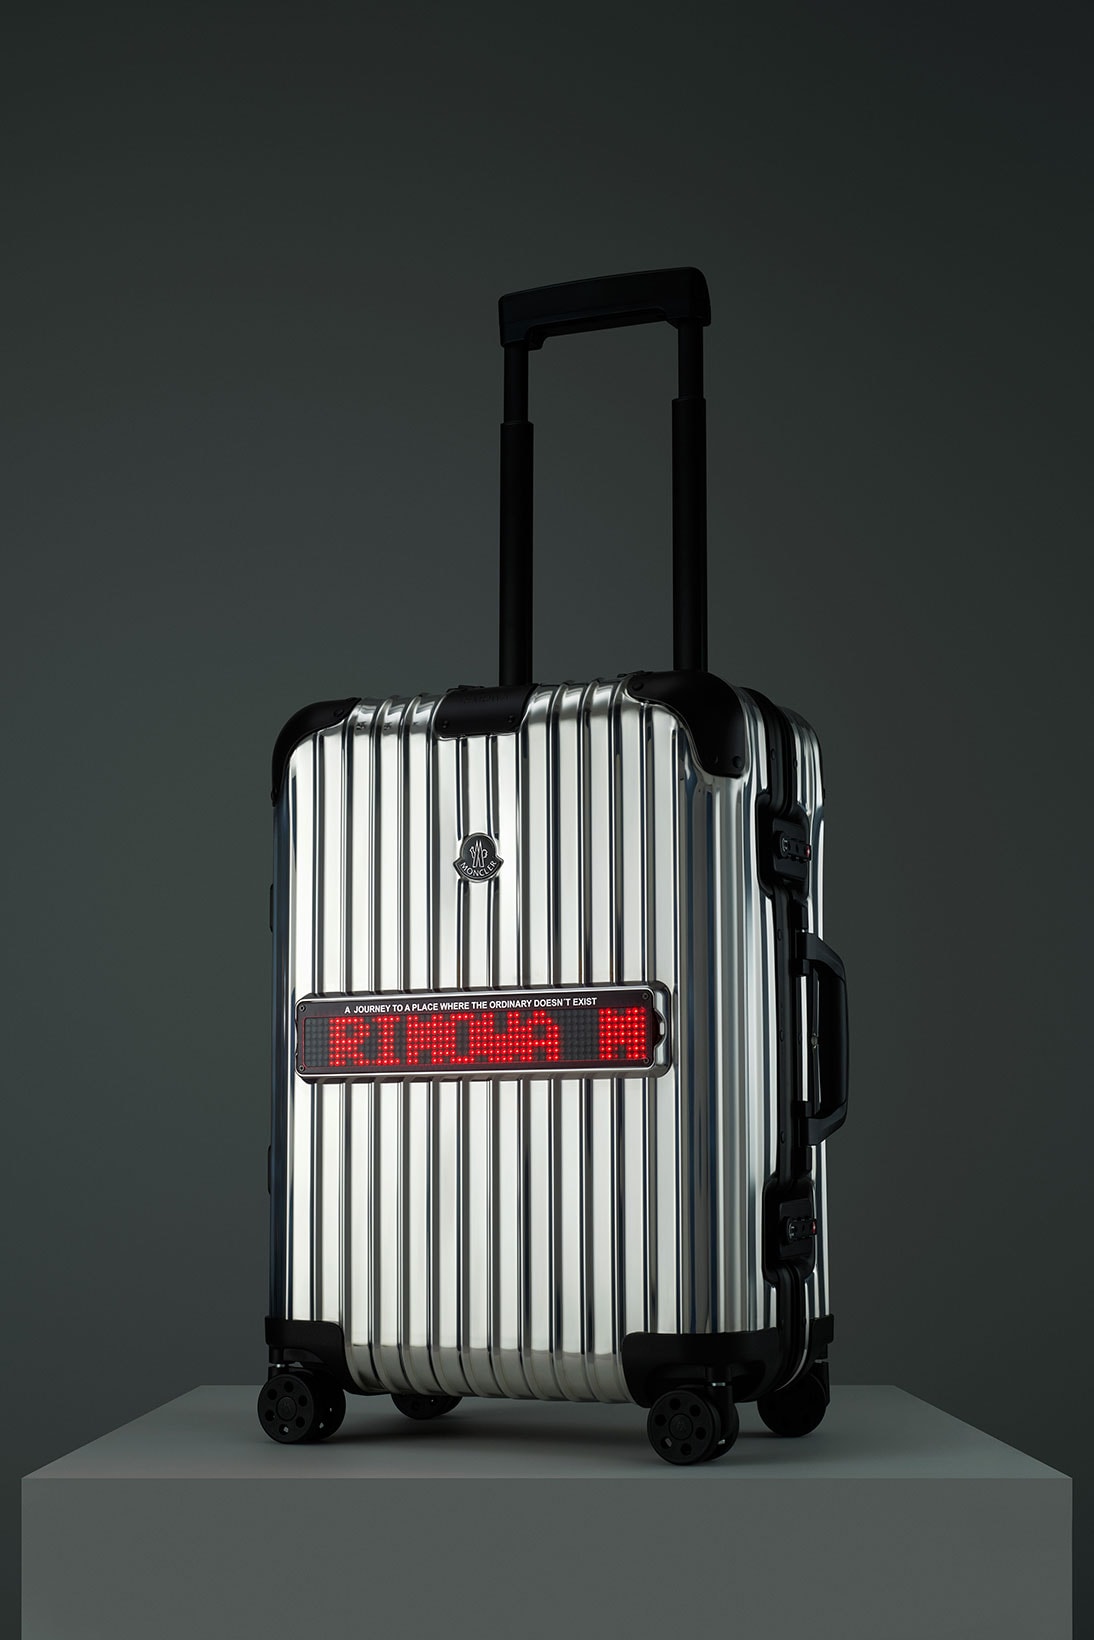 rimowa moncler genius reflection collaboration suitcase luggage first look